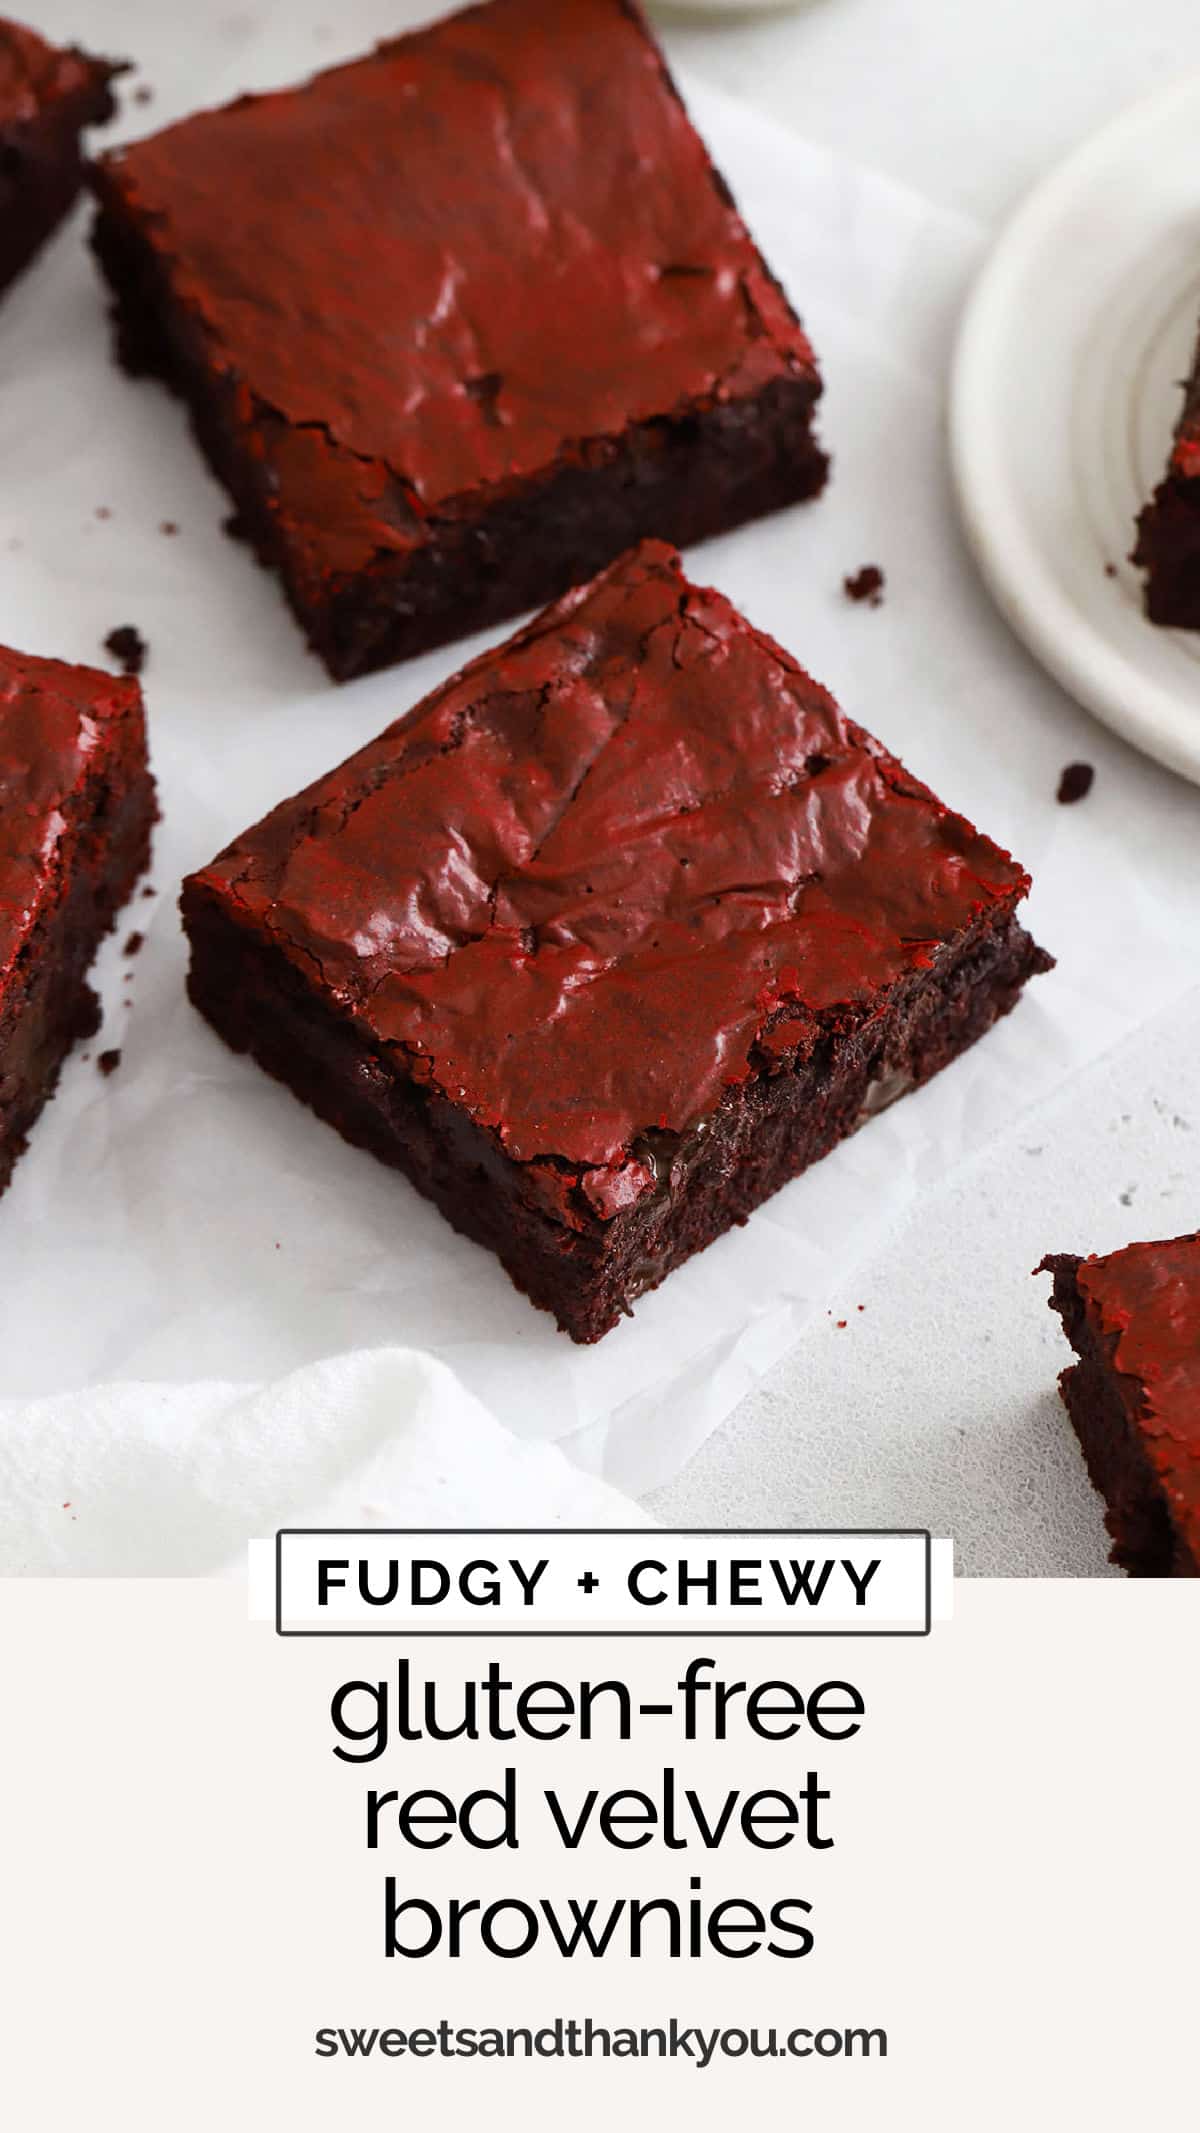 With their beautiful color and chocolate flavor, our Gluten-Free Red Velvet Brownies are a delightful twist on traditional brownies! This fudgy red velvet brownie recipe is perfect for Valentine's Day, Christmas, 4th of July, or birthdays. It's a delicious gluten-free brownies recipe you'll LOVE!